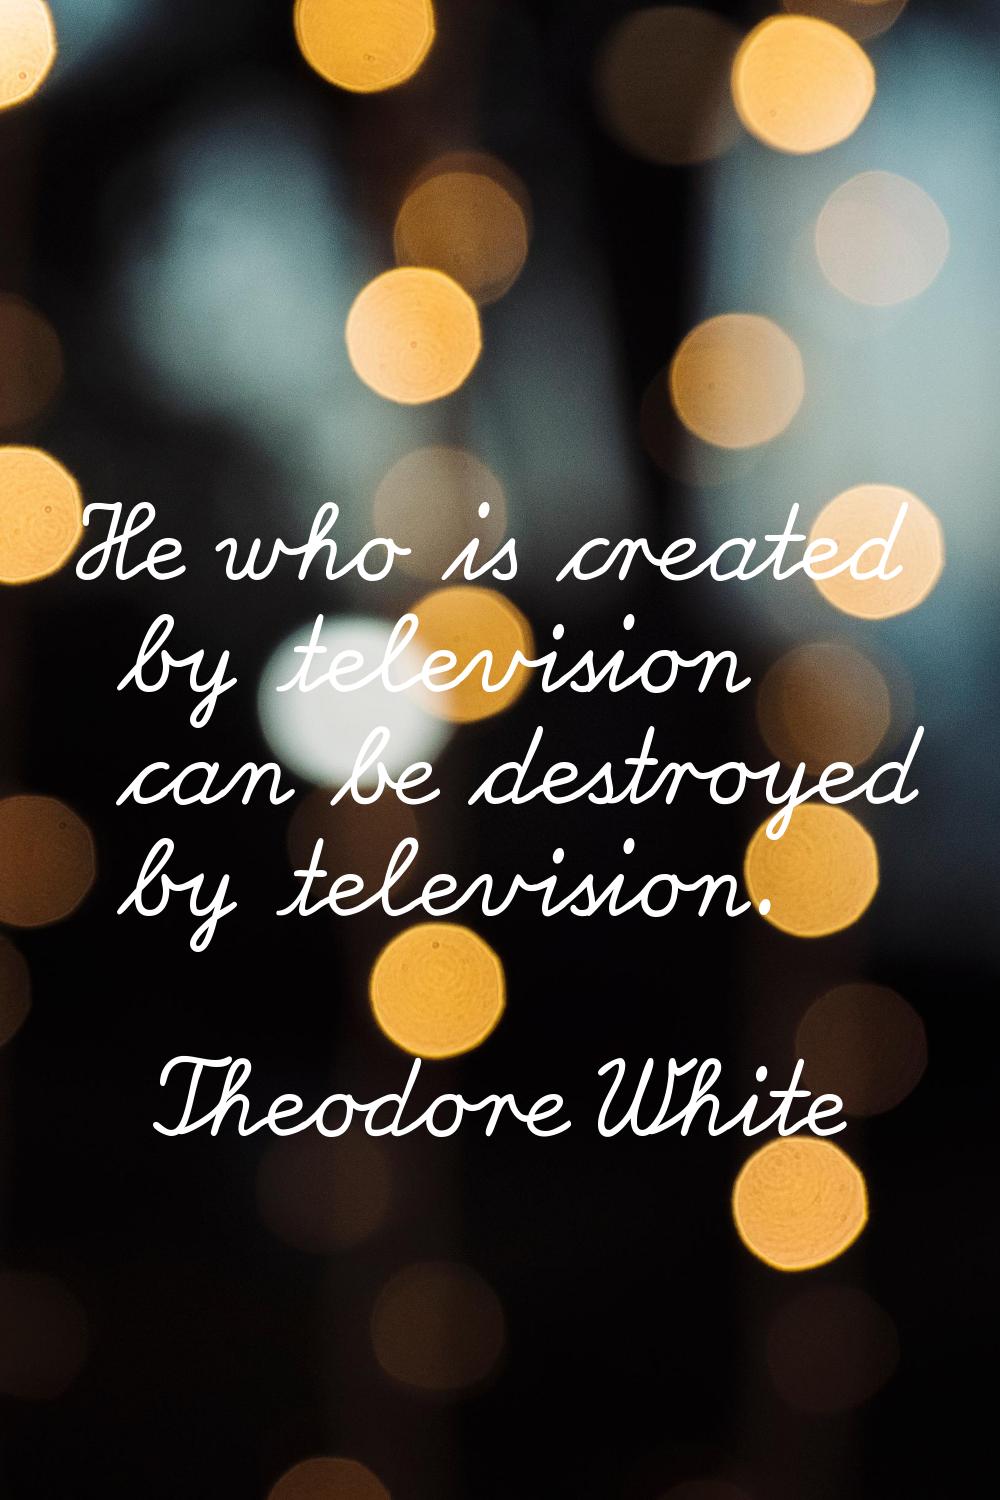 He who is created by television can be destroyed by television.